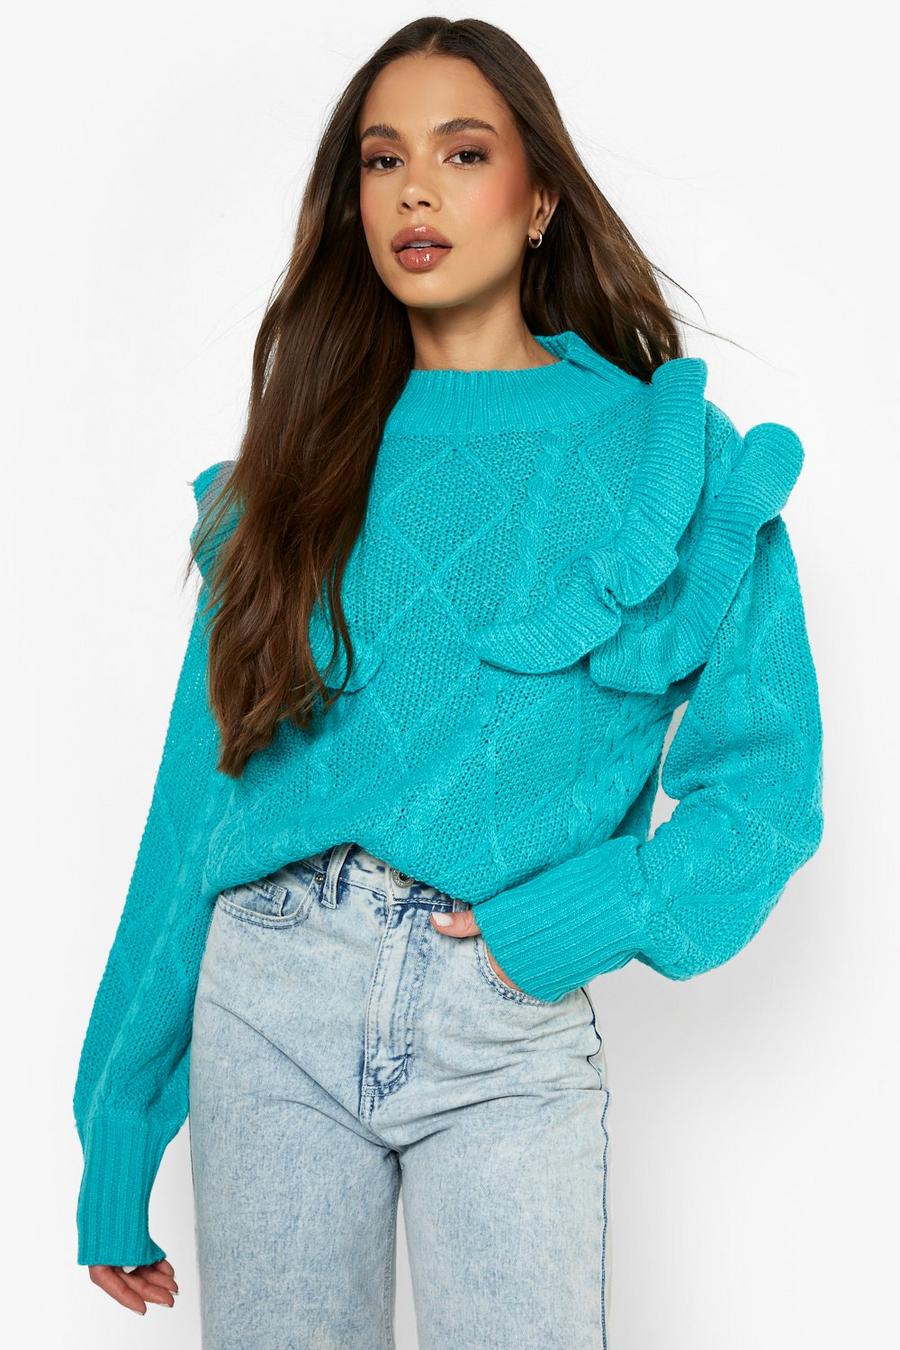 Jade green Ruffle Cable Knitted Sweater